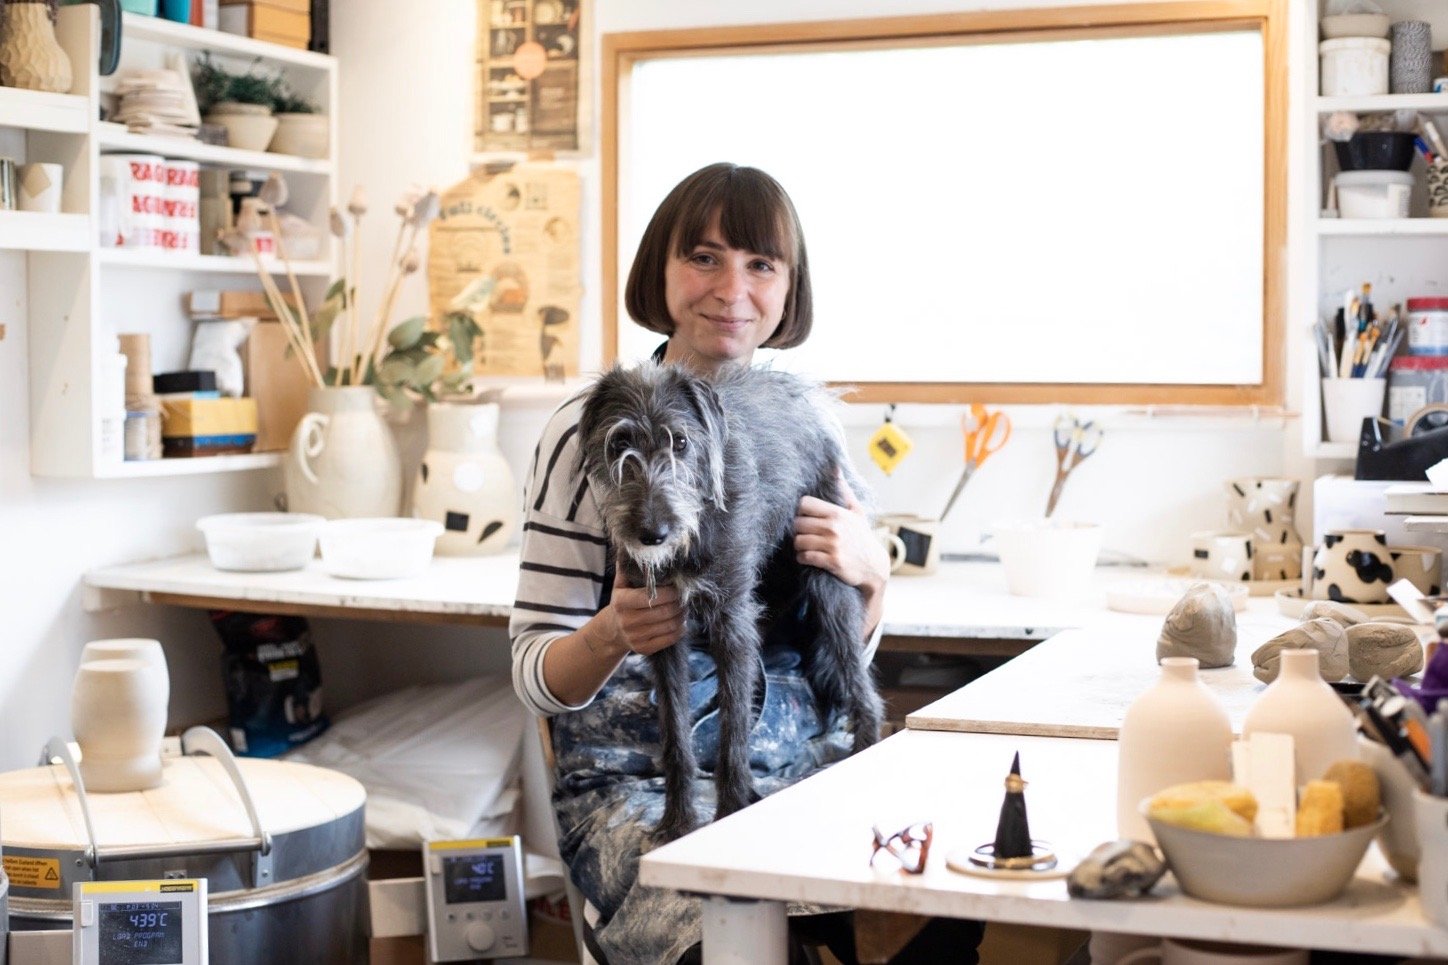 Ceramicist Hannah Bould with her dog in her studio